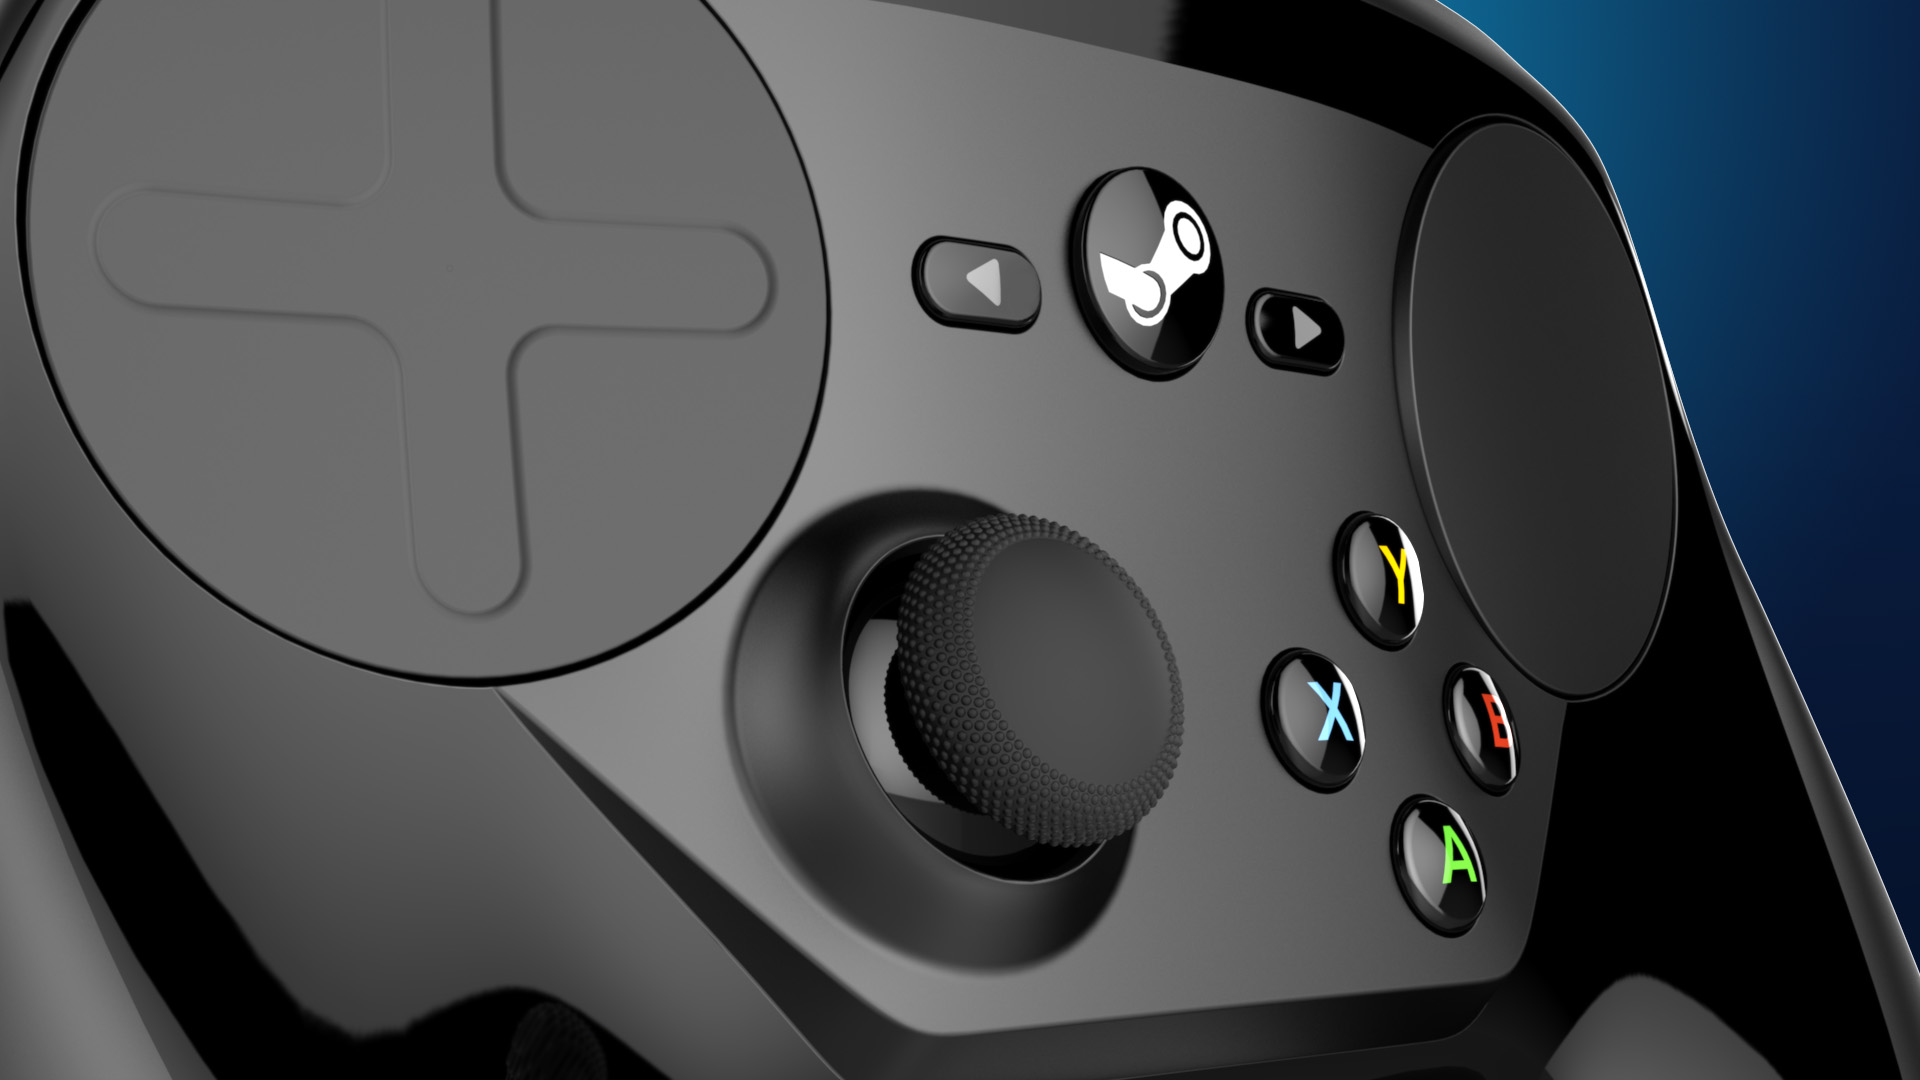 where can i buy a steam controller